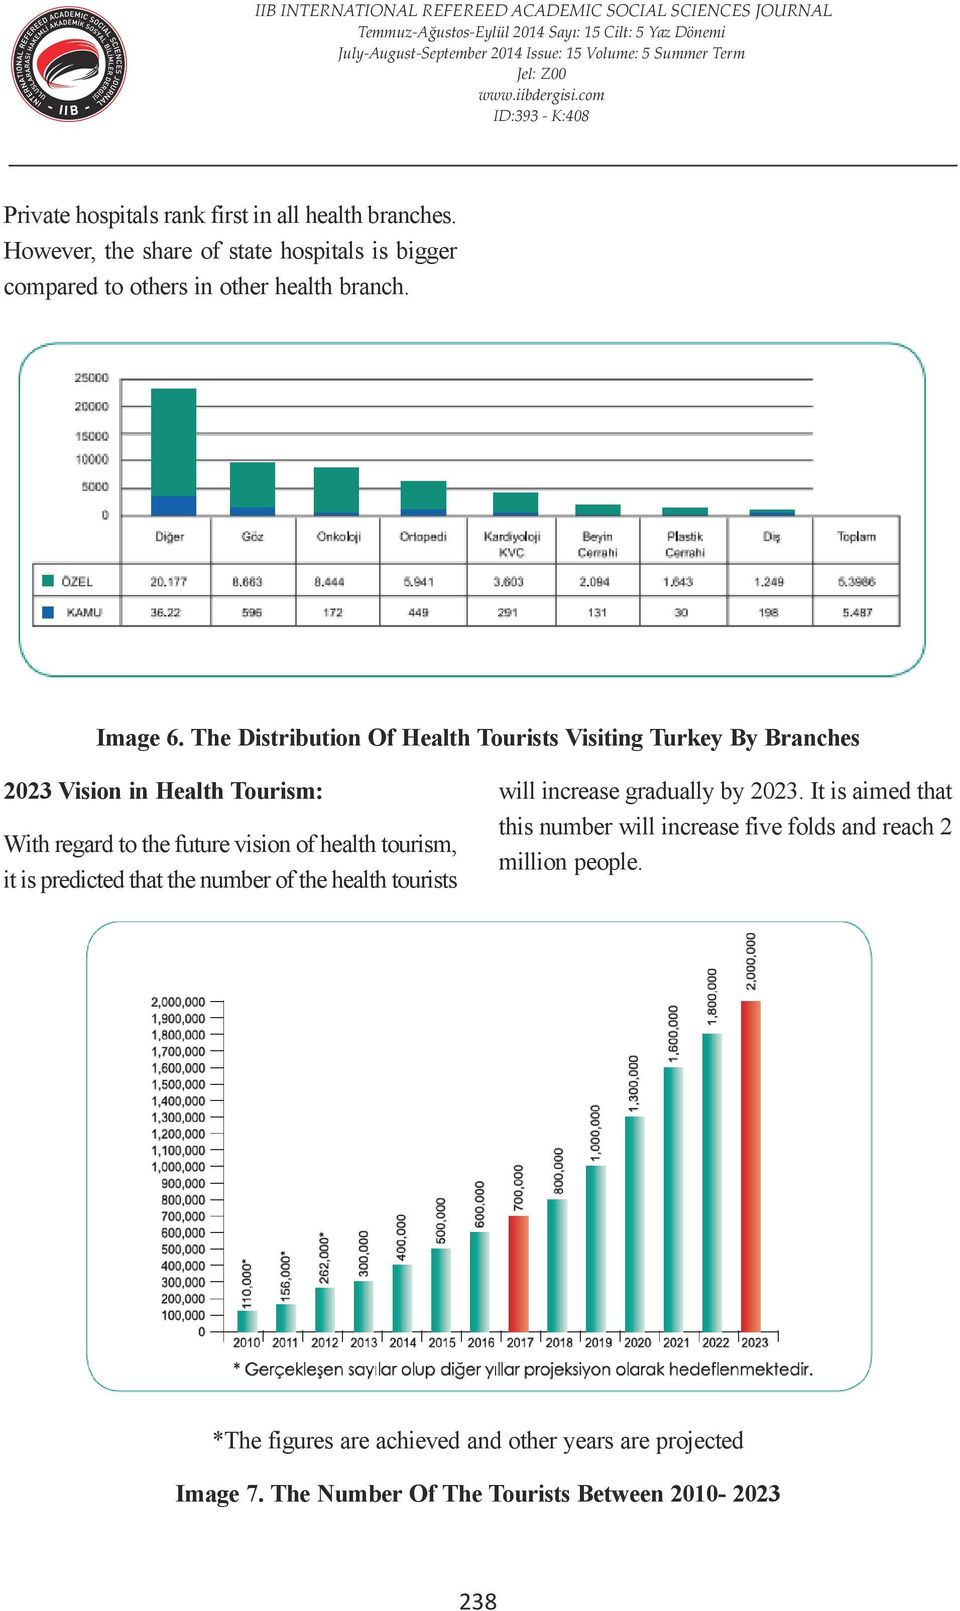 The Distribution Of Health Tourists Visiting Turkey By Branches 2023 Vision in Health Tourism: With regard to the future vision of health